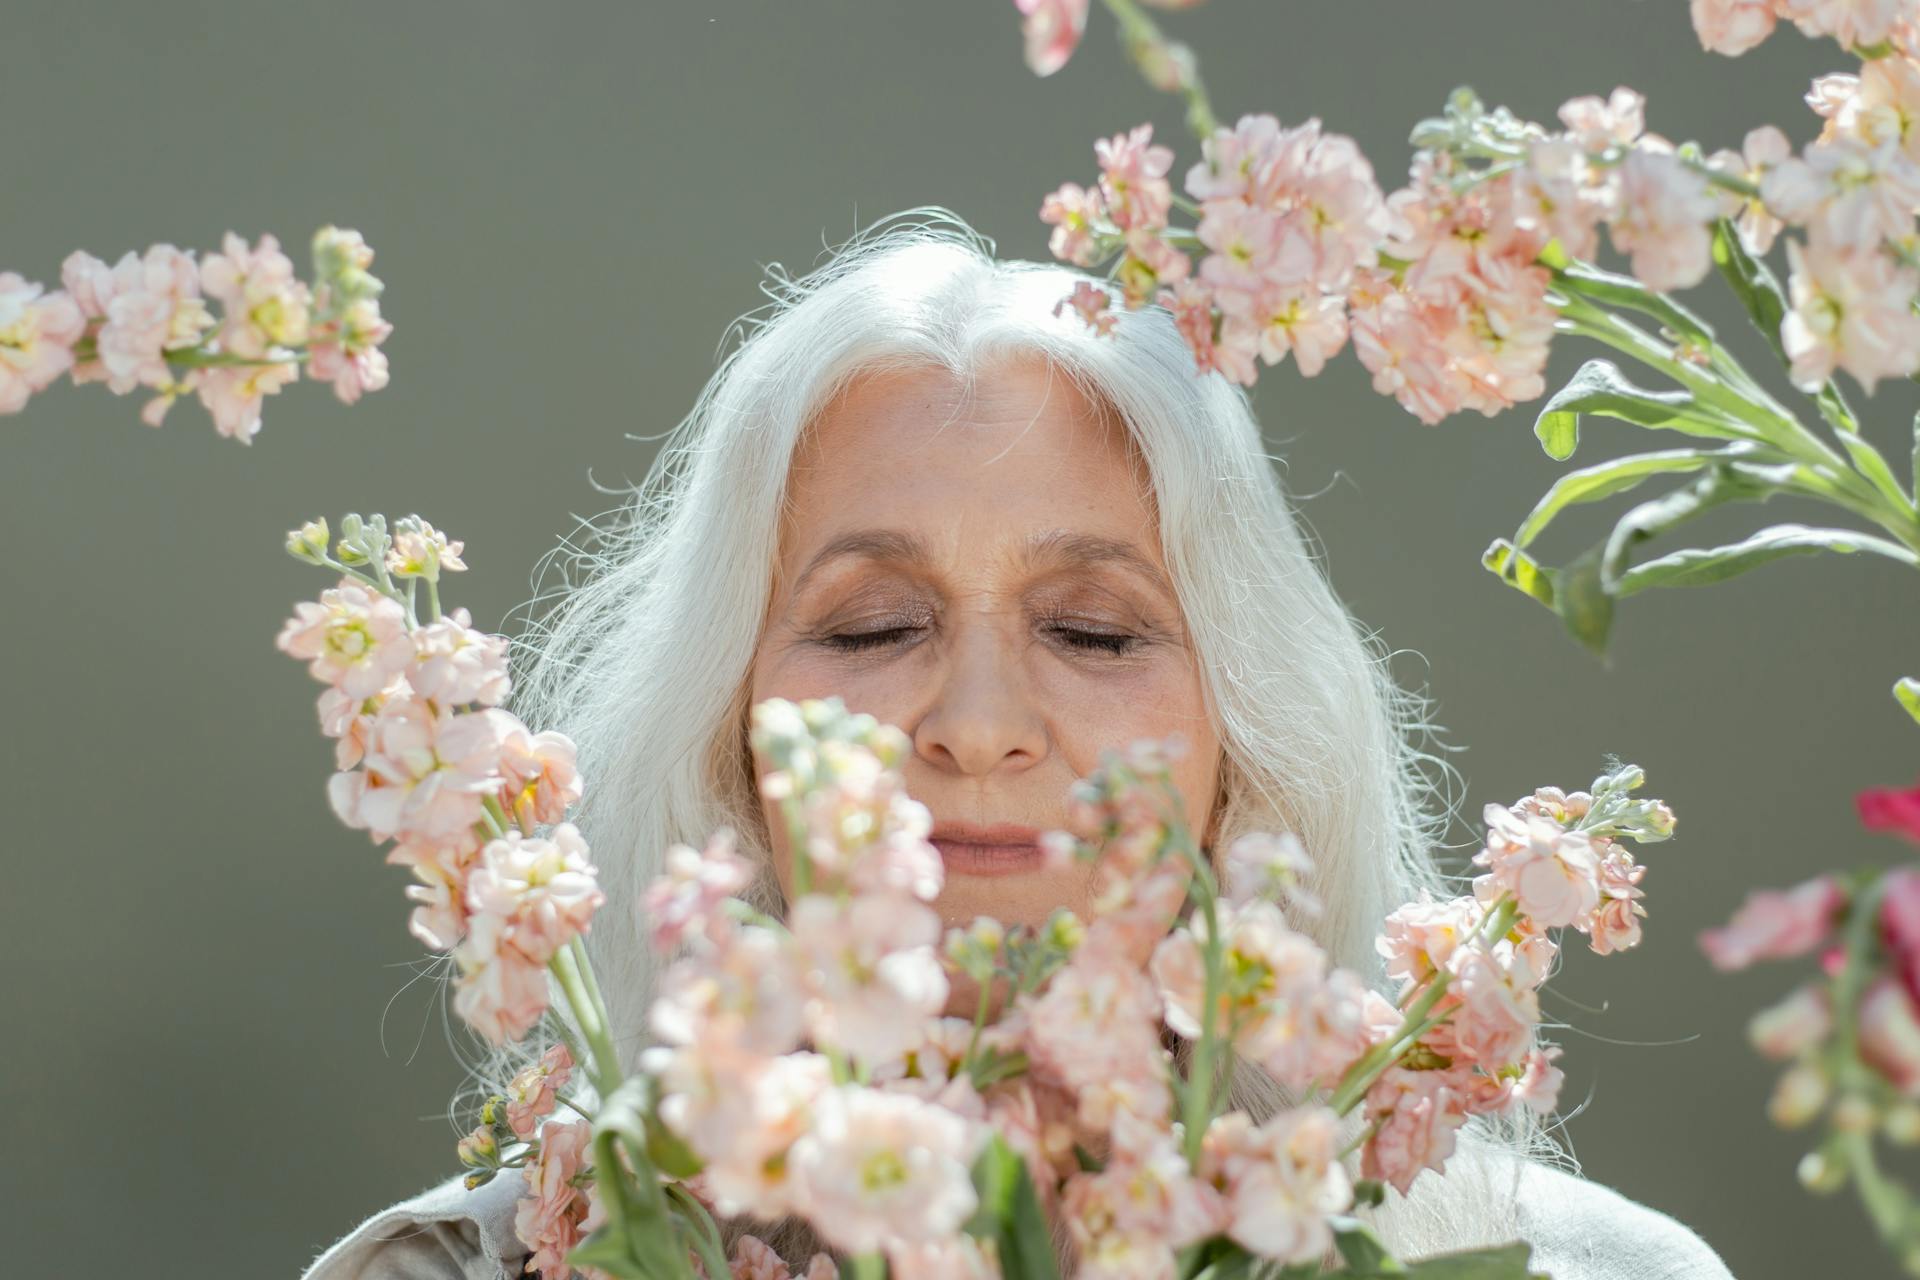 Mature woman smelling flowers | Source: Pexels